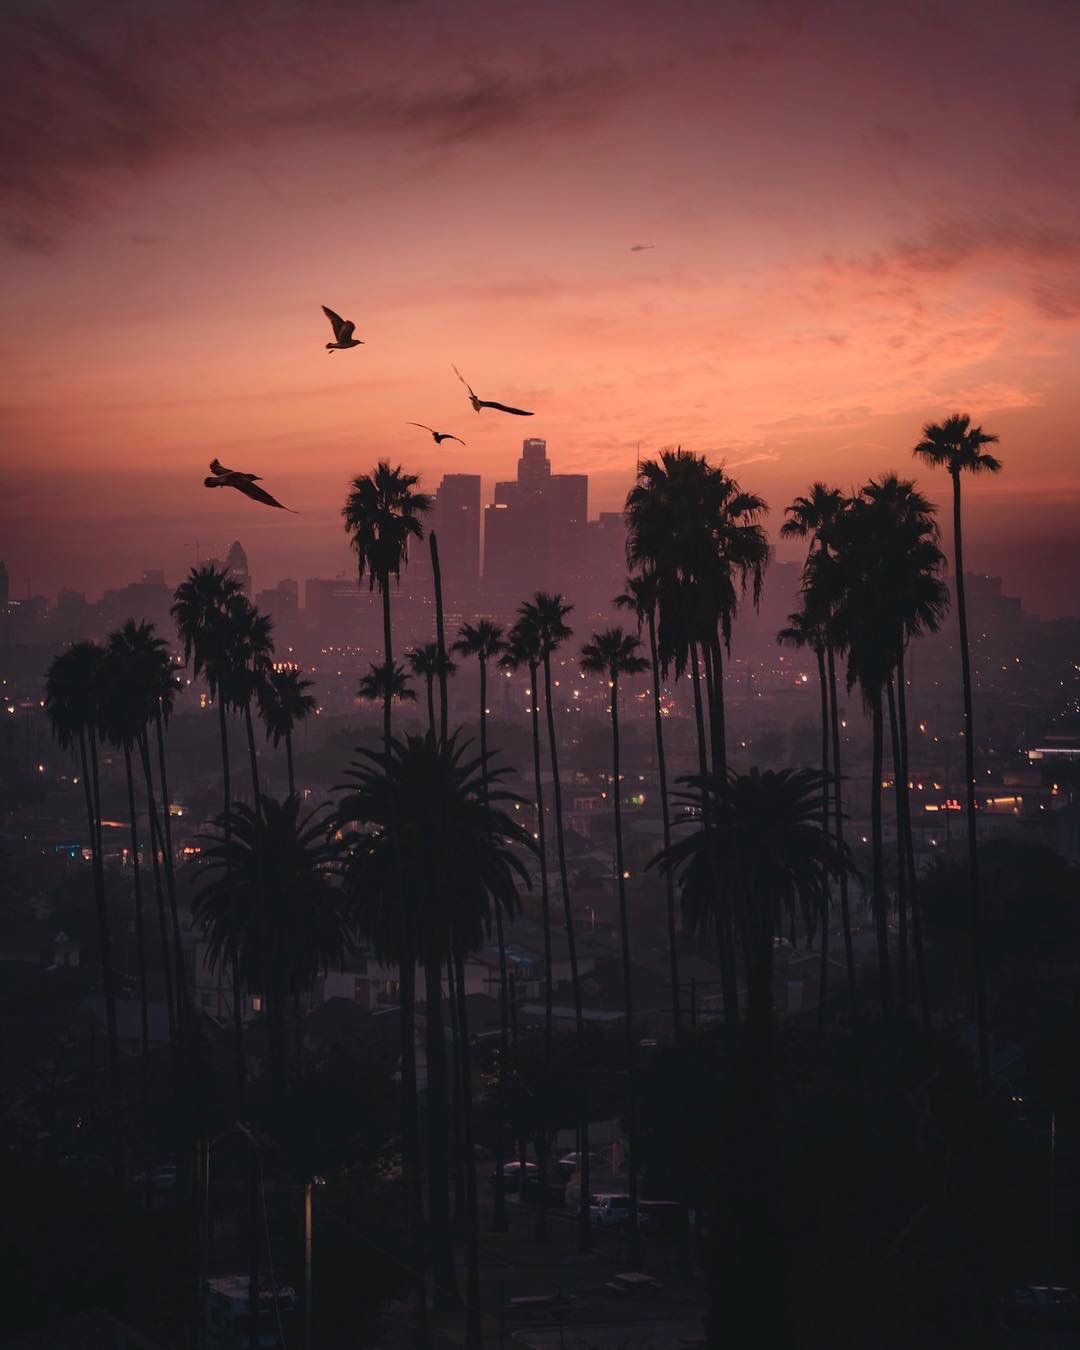 Placiies on. City iphone wallpaper, Sunset city, California wallpaper